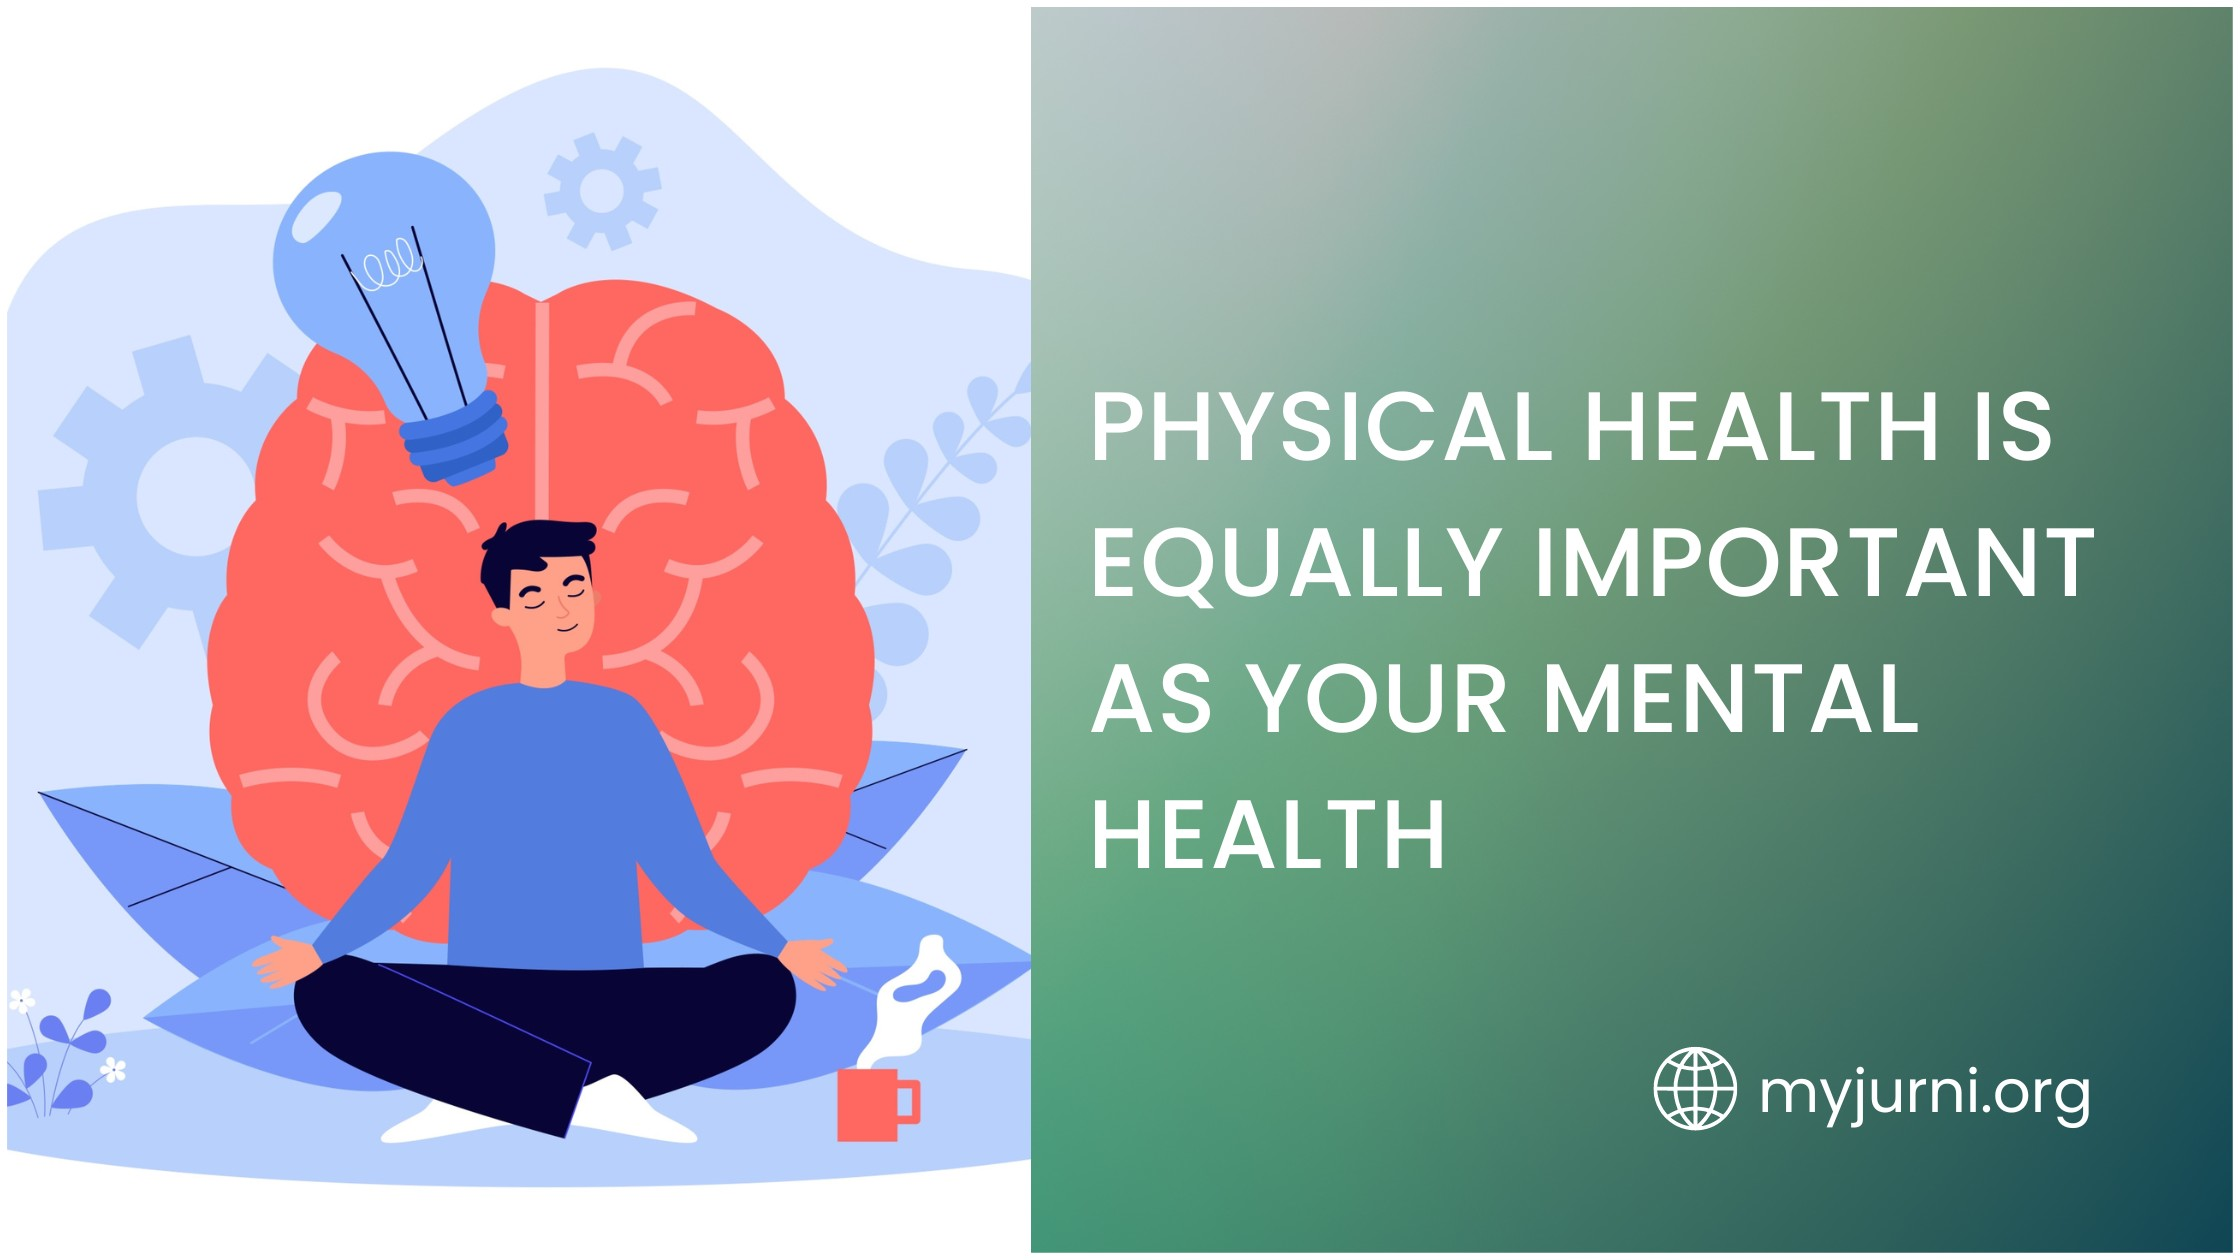 PHYSICAL HEALTH IS EQUALLY IMPORTANT AS YOUR MENTAL HEALTH